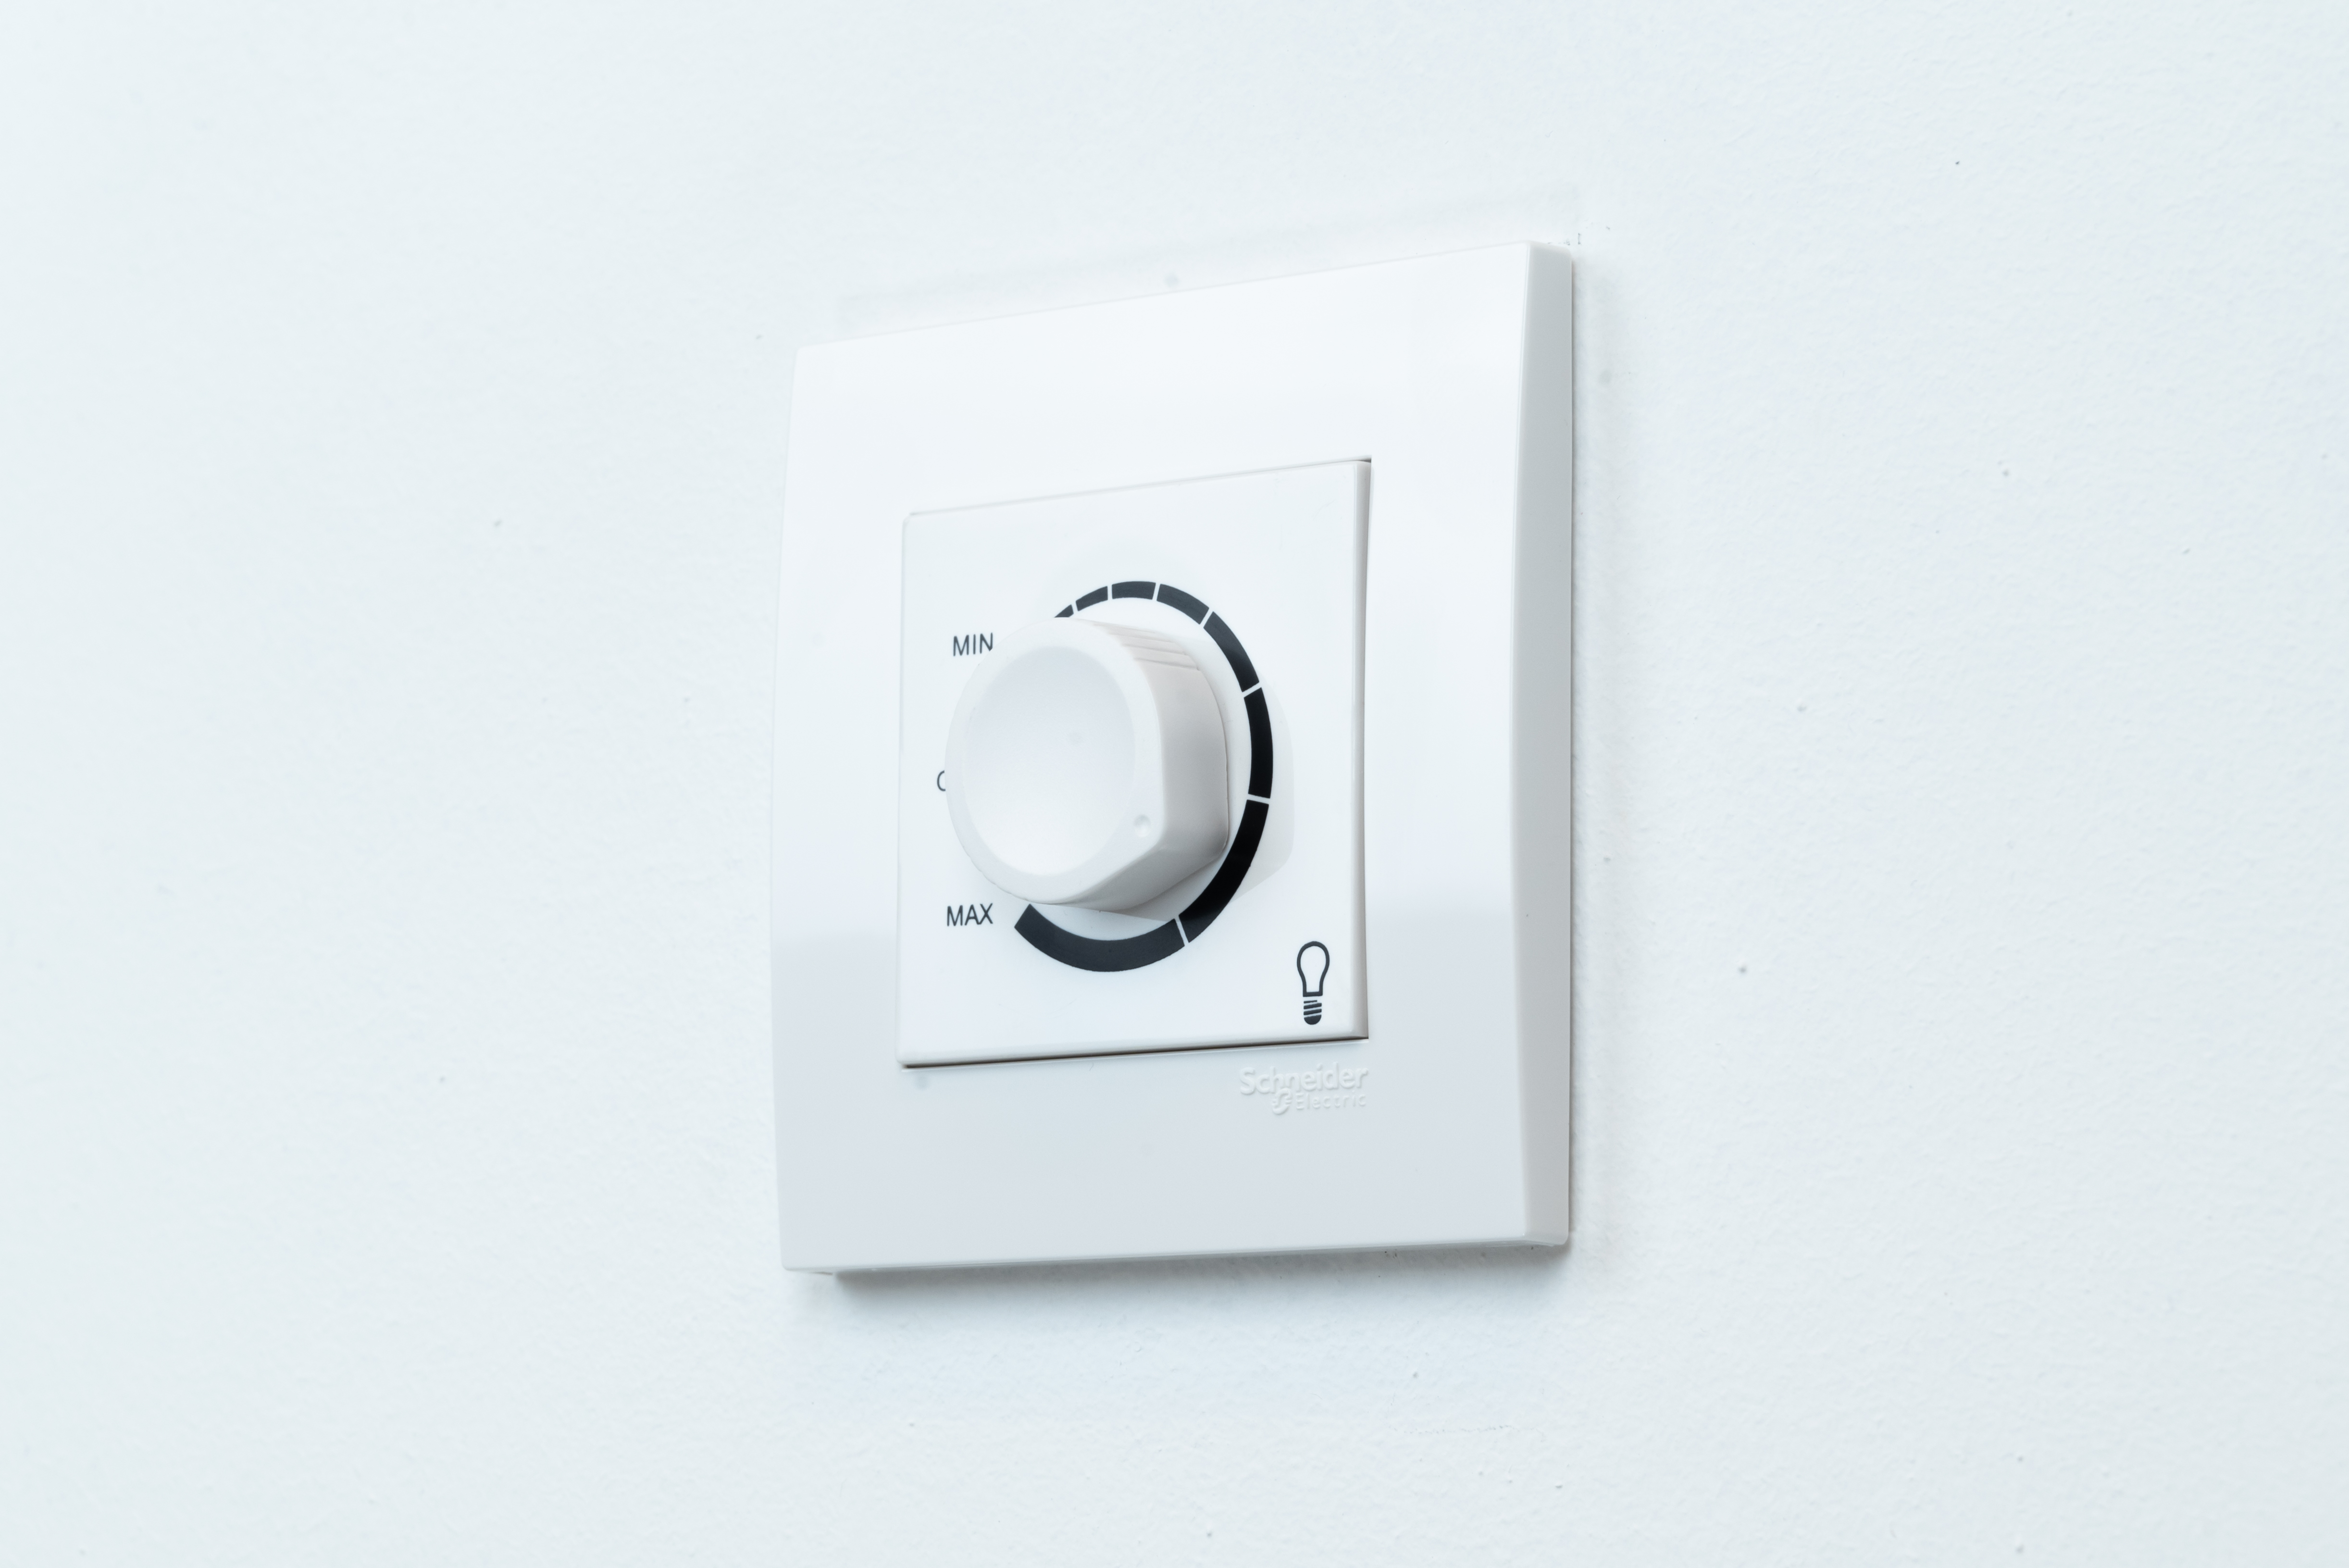 A basic dimmer switch with integrated off setting